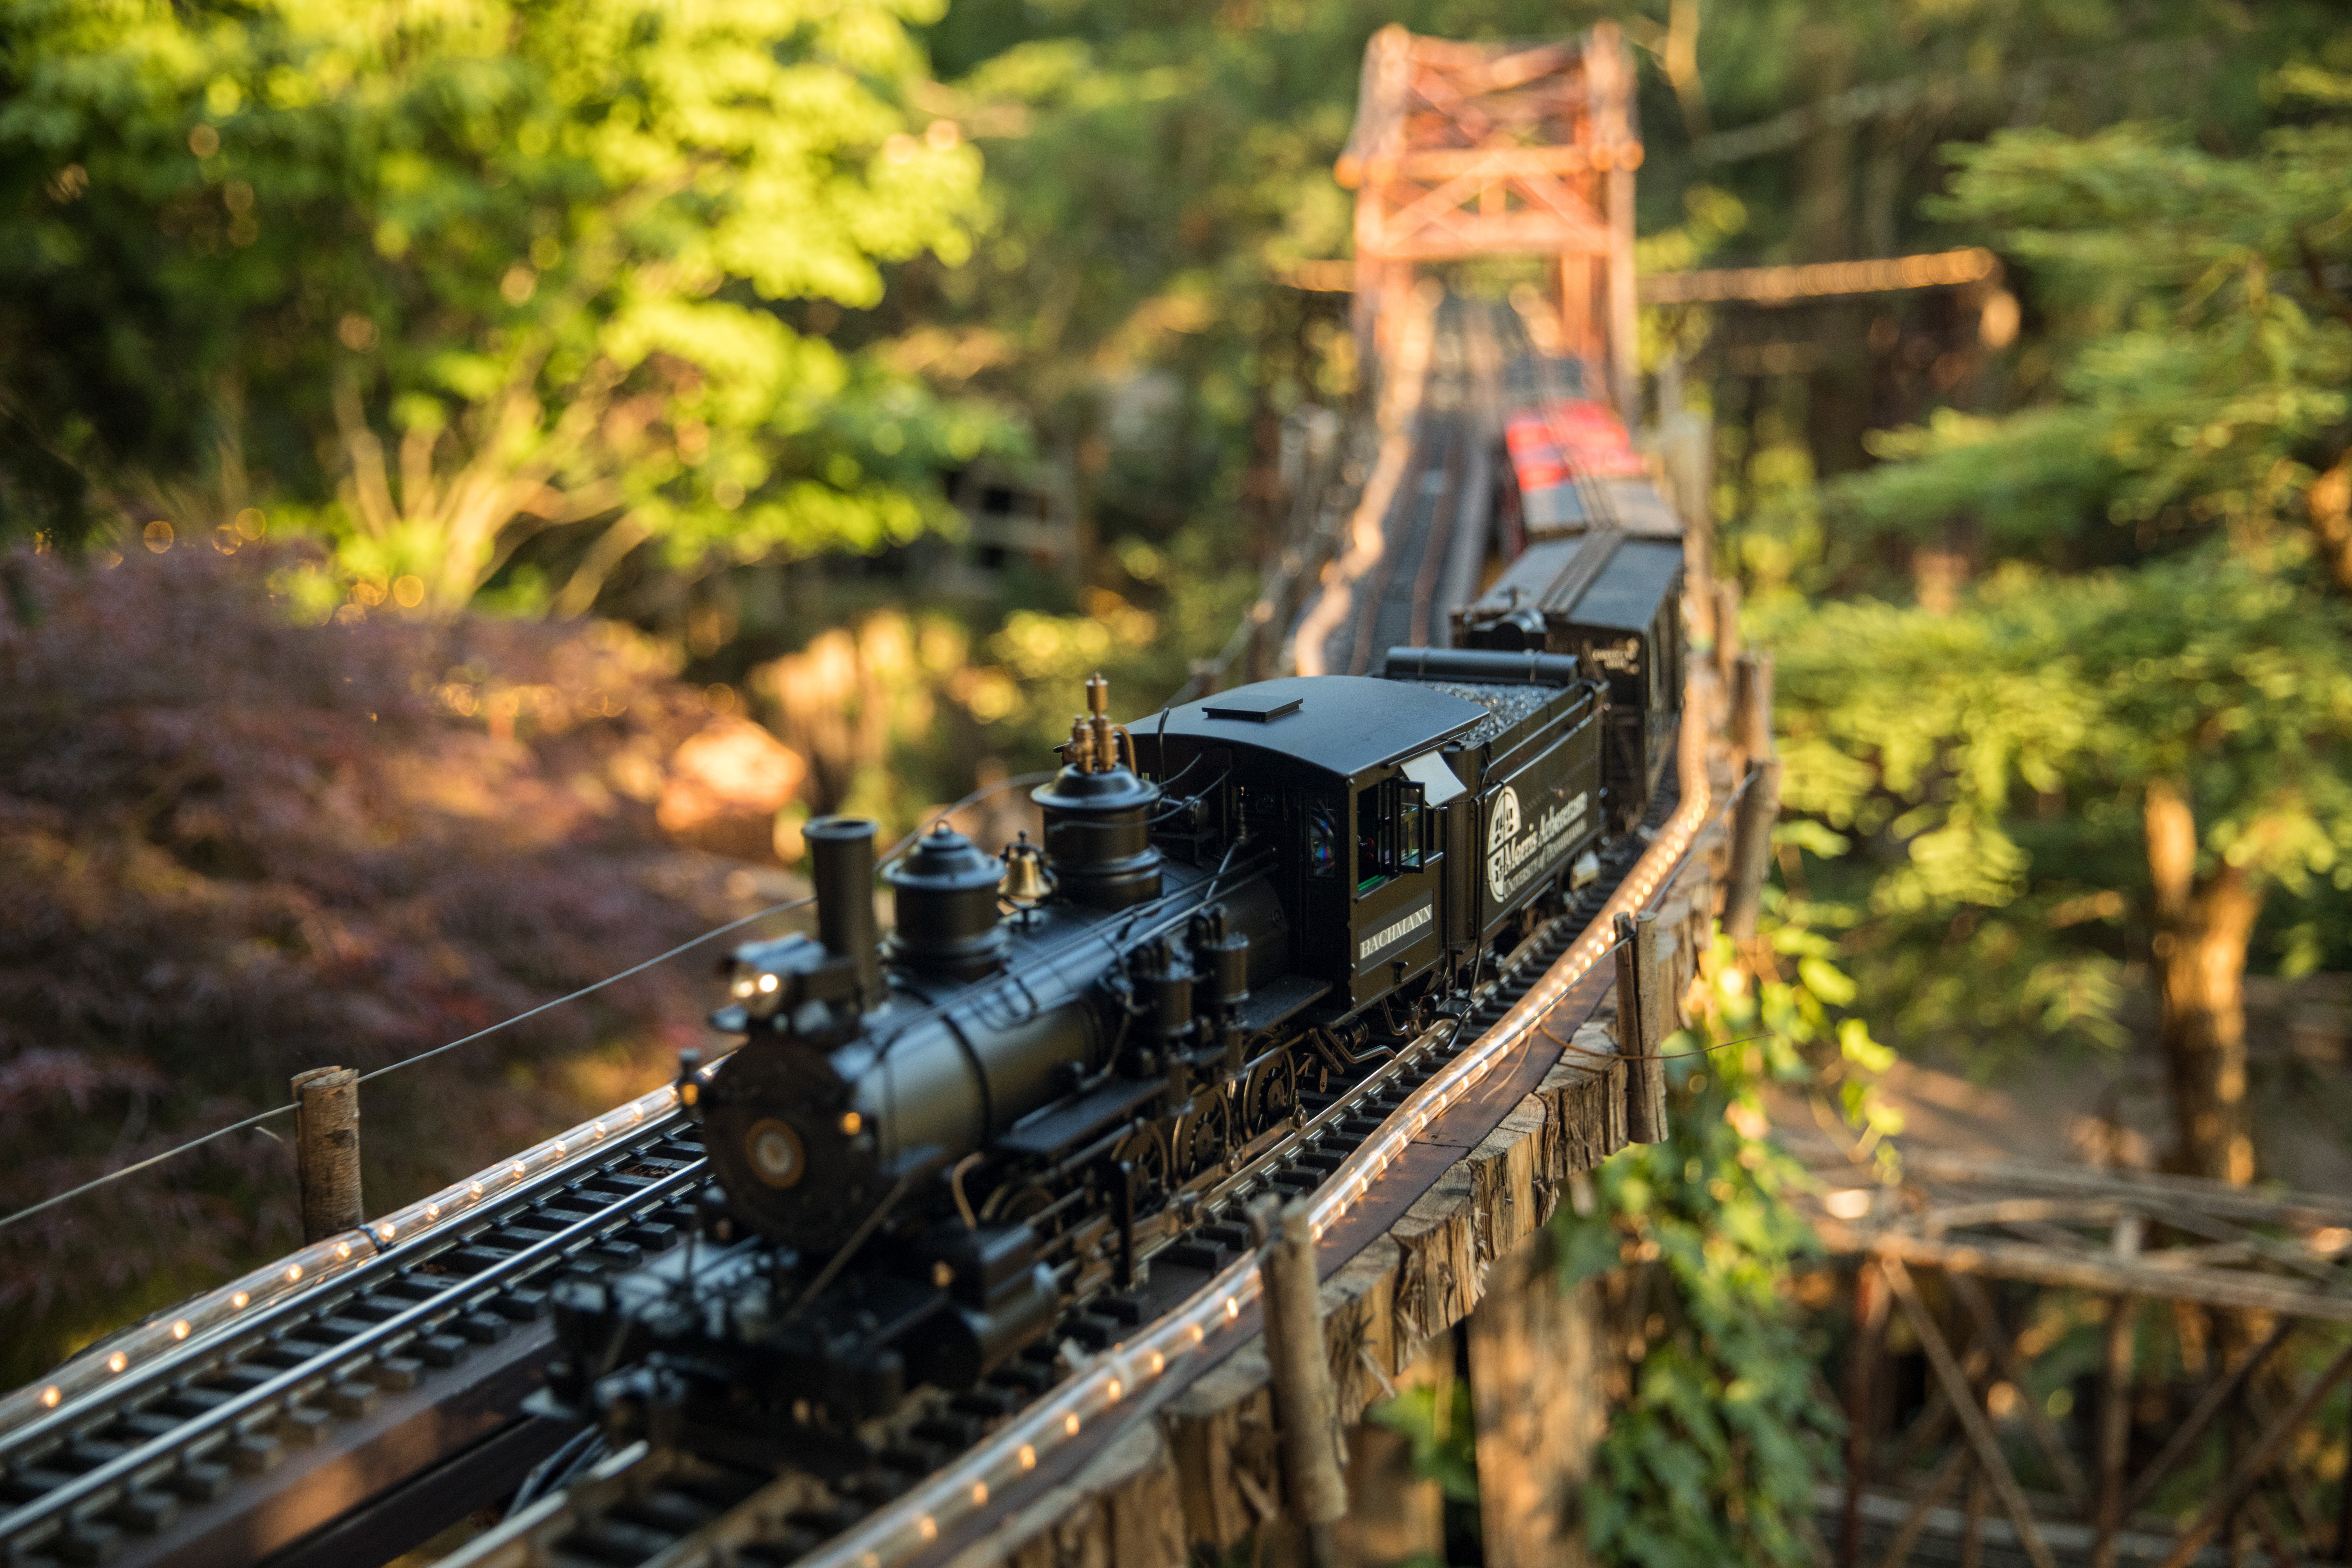 A miniature train that reads 'Morris Arboretum' on its side, surrounded by trees and foliage.